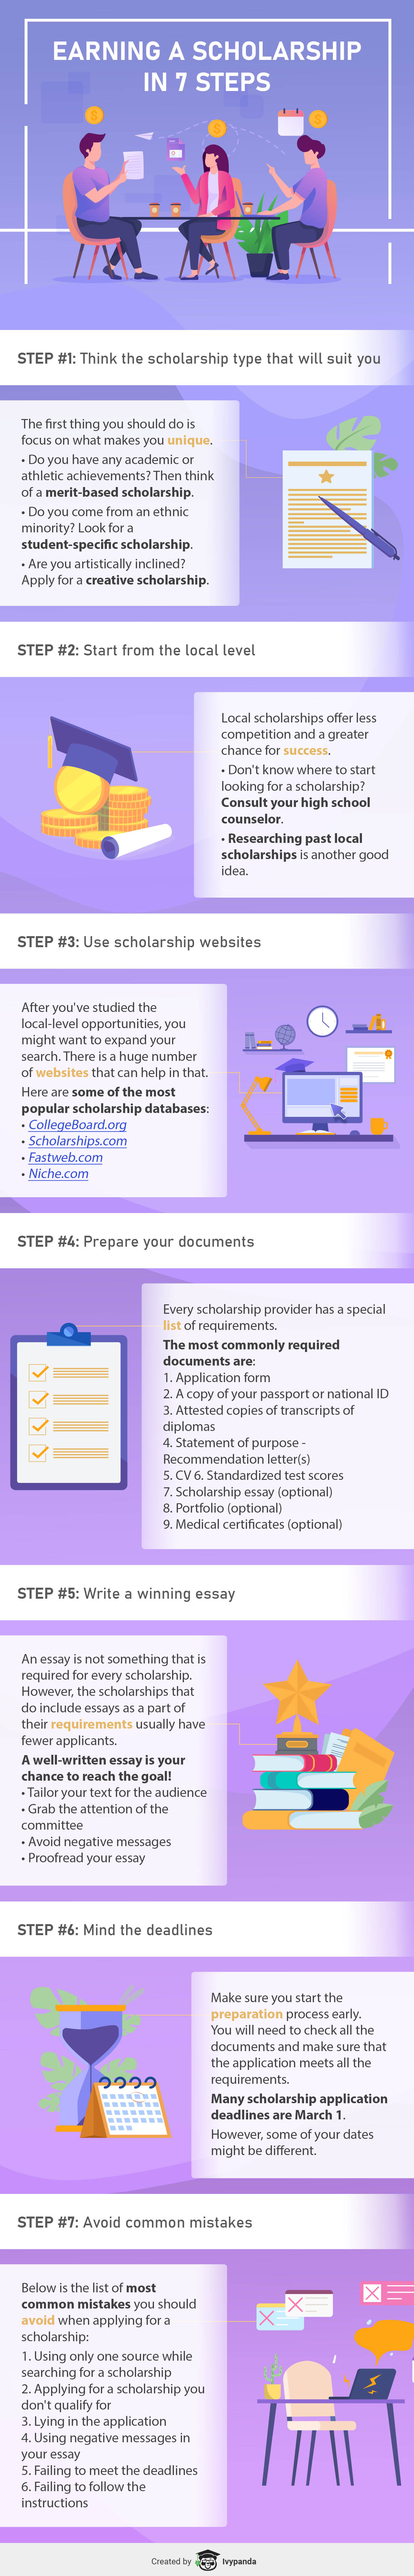 The infographic contains seven steps that are necessary to earn a scholarship, from focusing on your talents to preparing all the necessary documents.